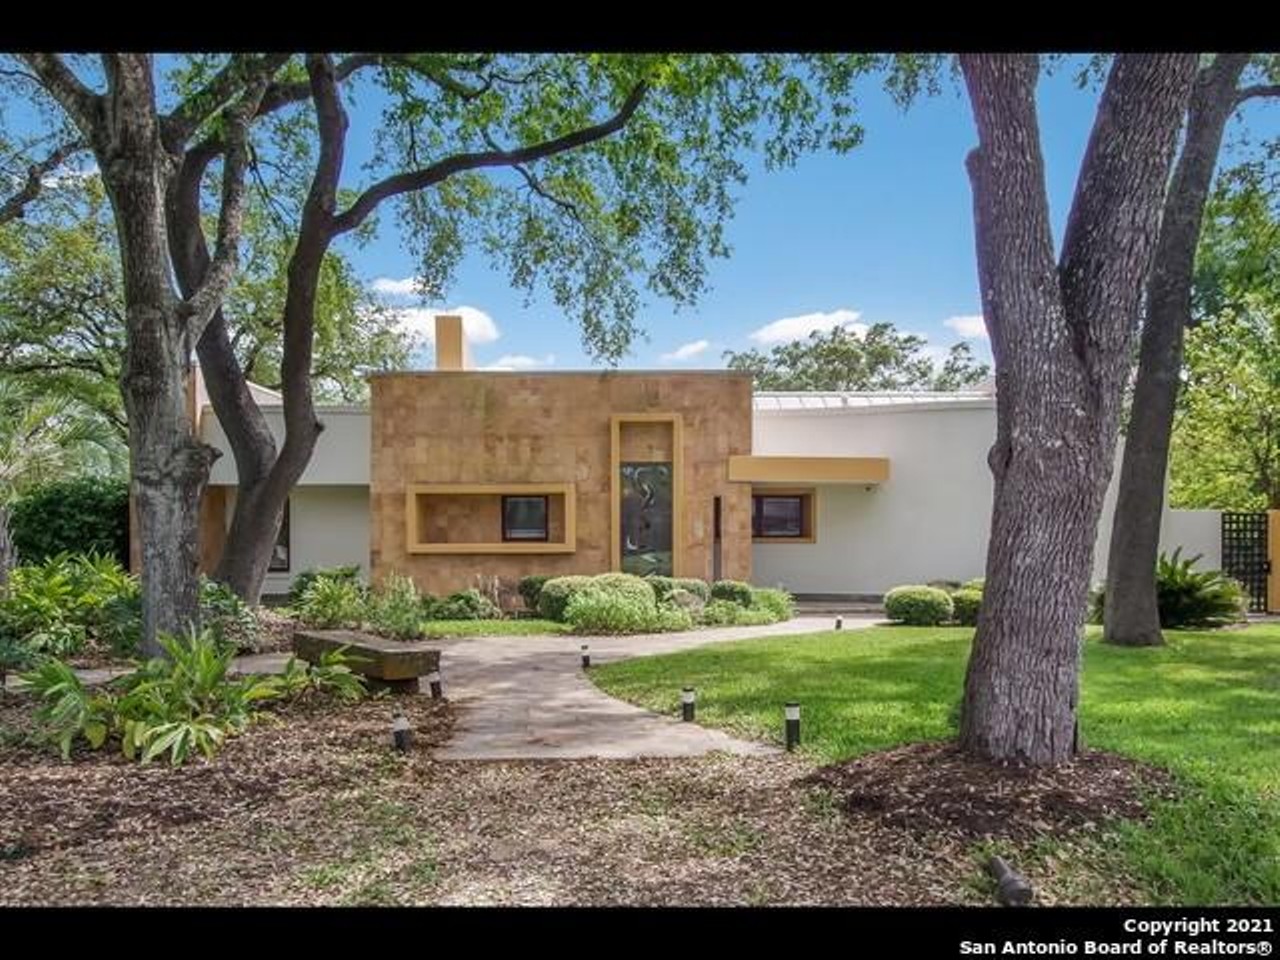 Five stylish Mid-Century Modern homes for sale in San Antonio for $450,000 or less